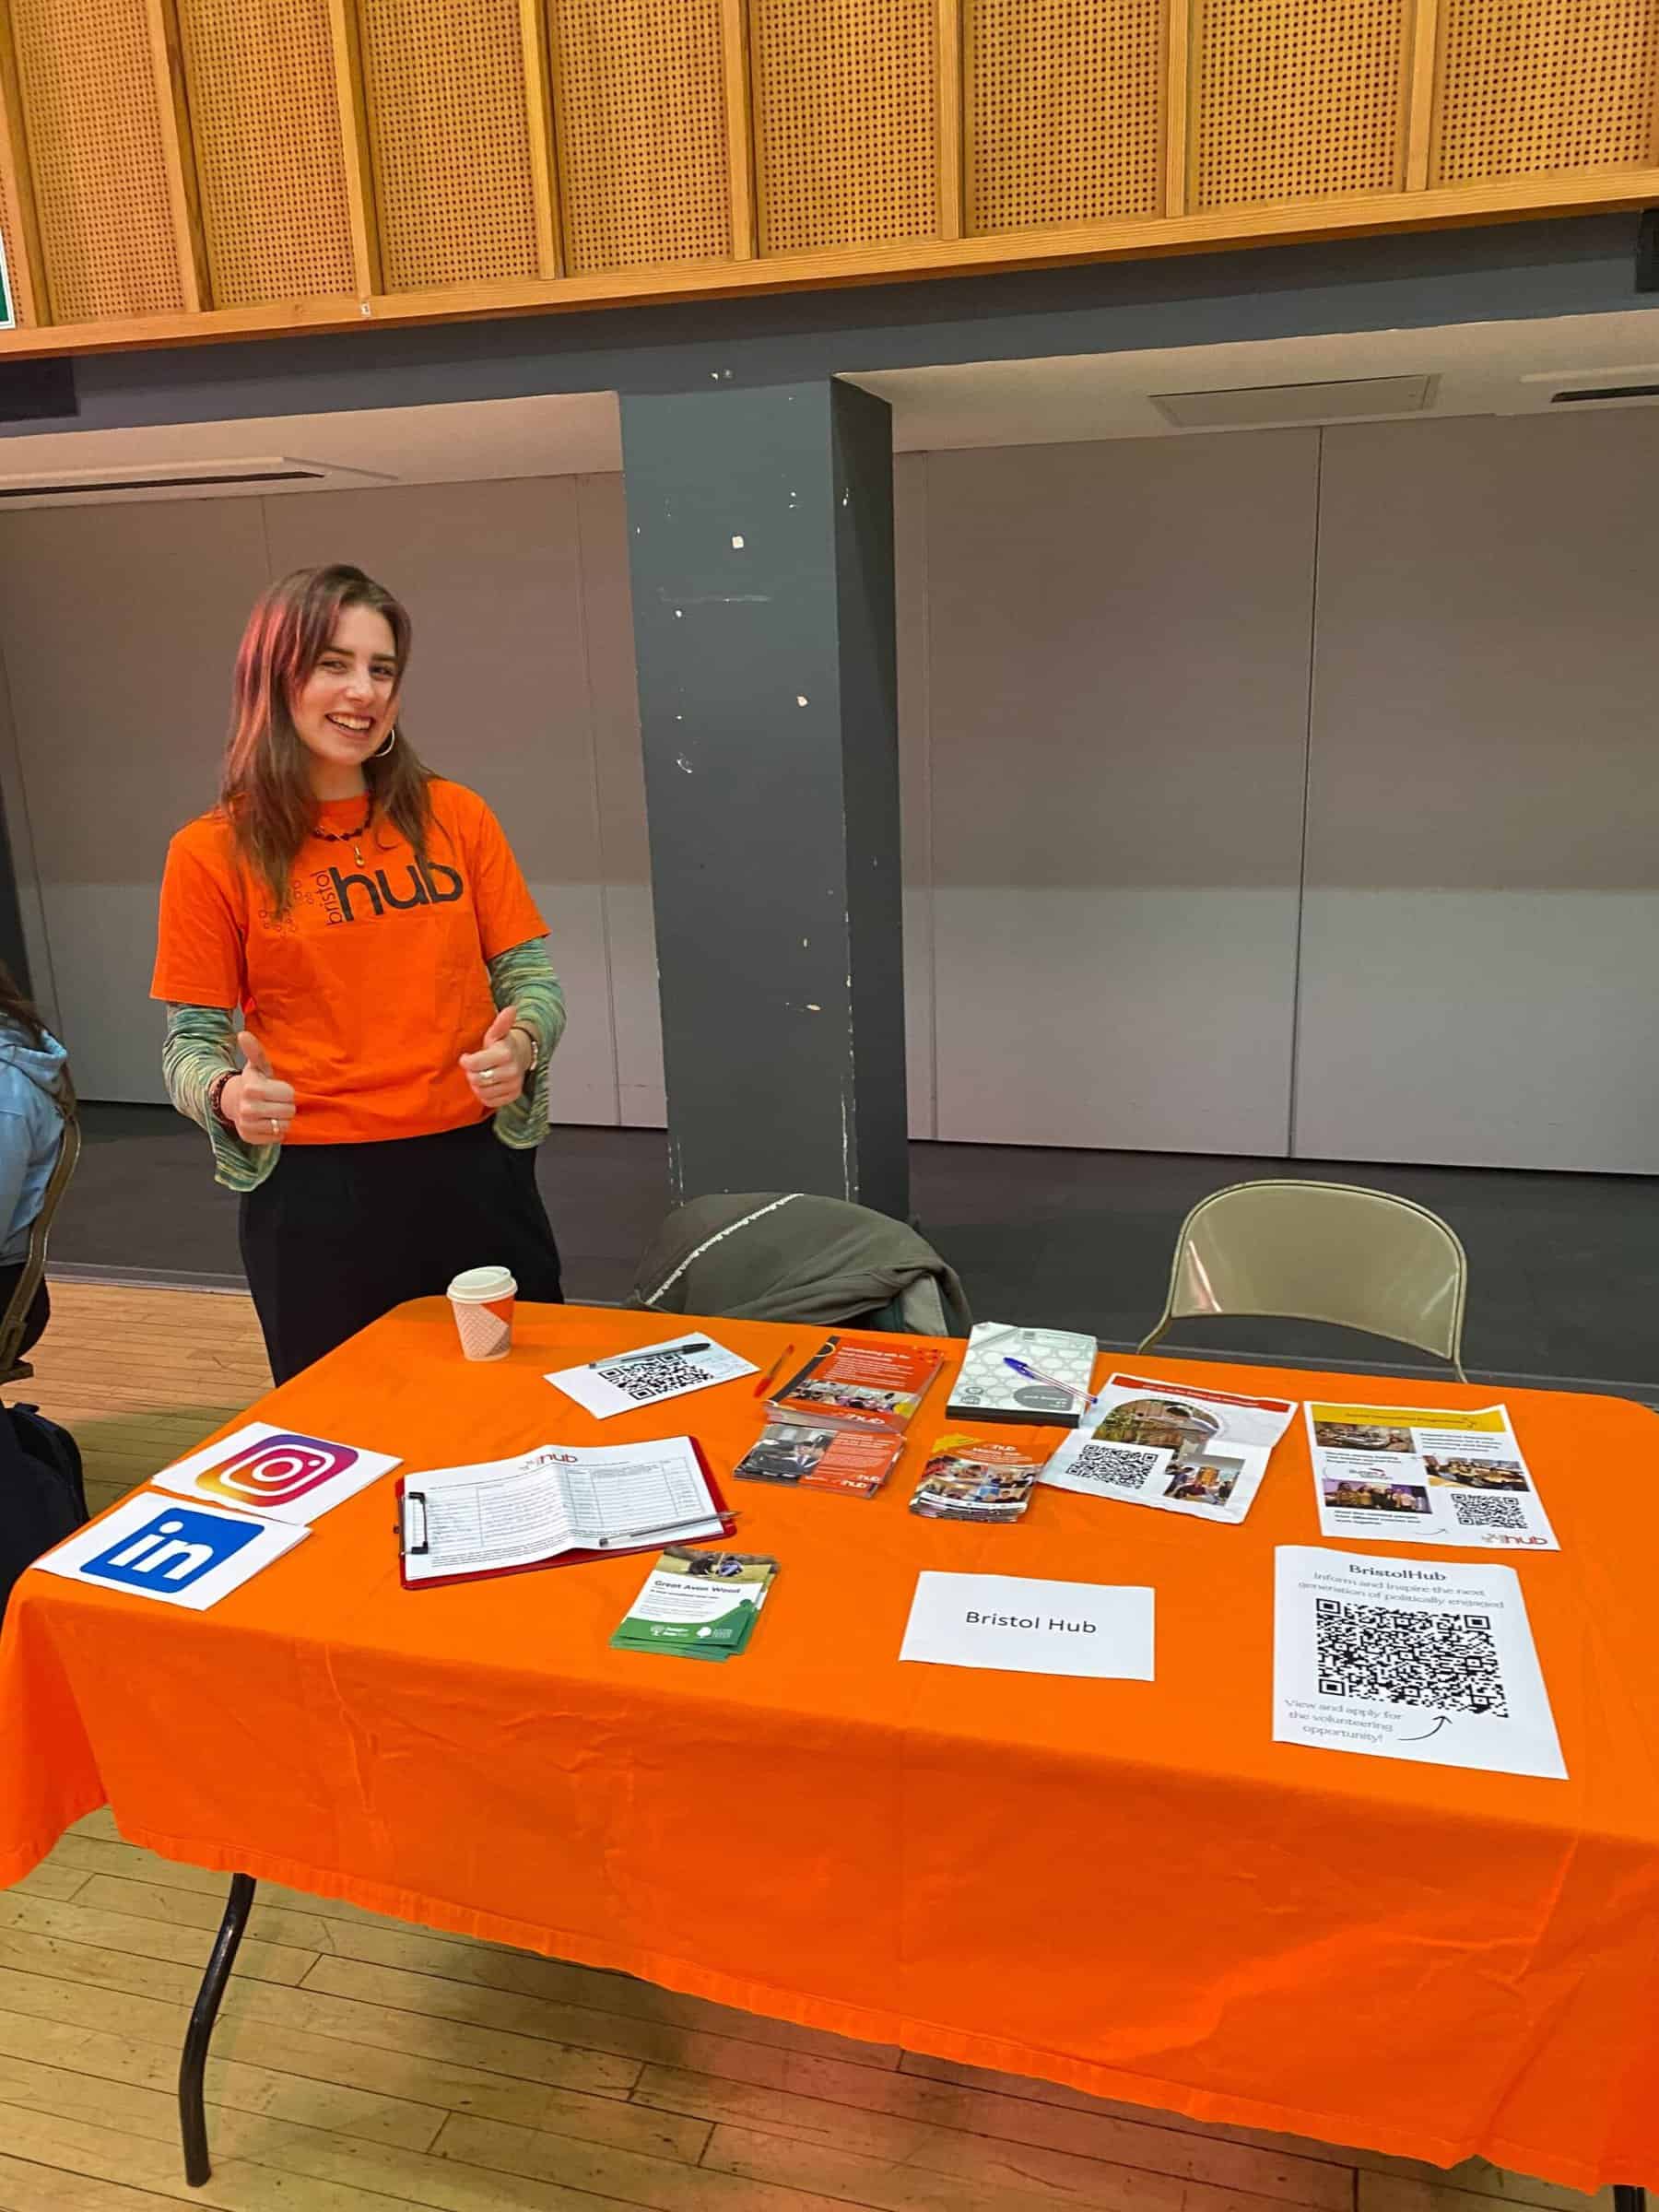 ID: a volunteer wearing an orange Bristol Hub t-shirt stands behind an orange table which is full of information about Bristol Hub activities.